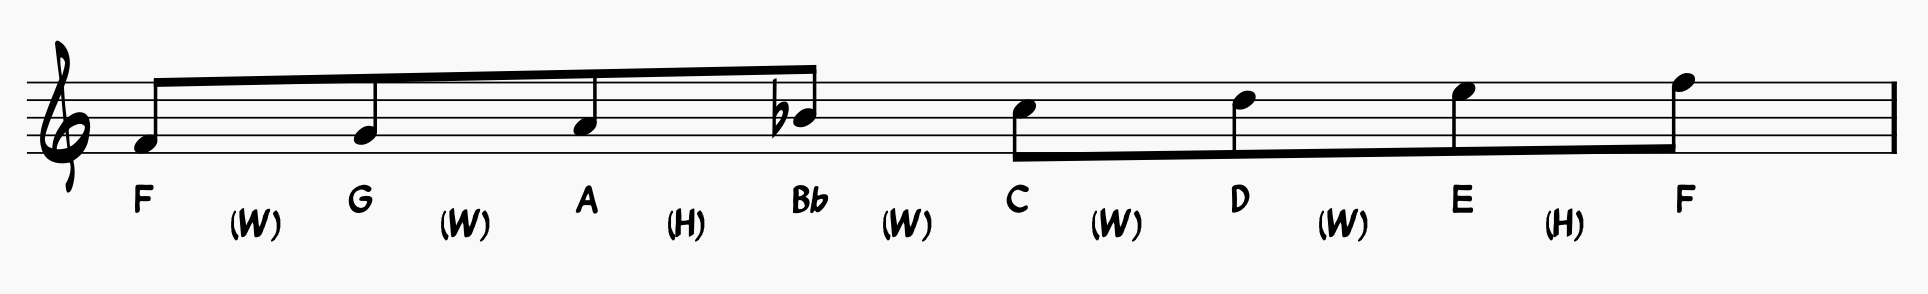 F Major Scale notated with whole steps and half steps